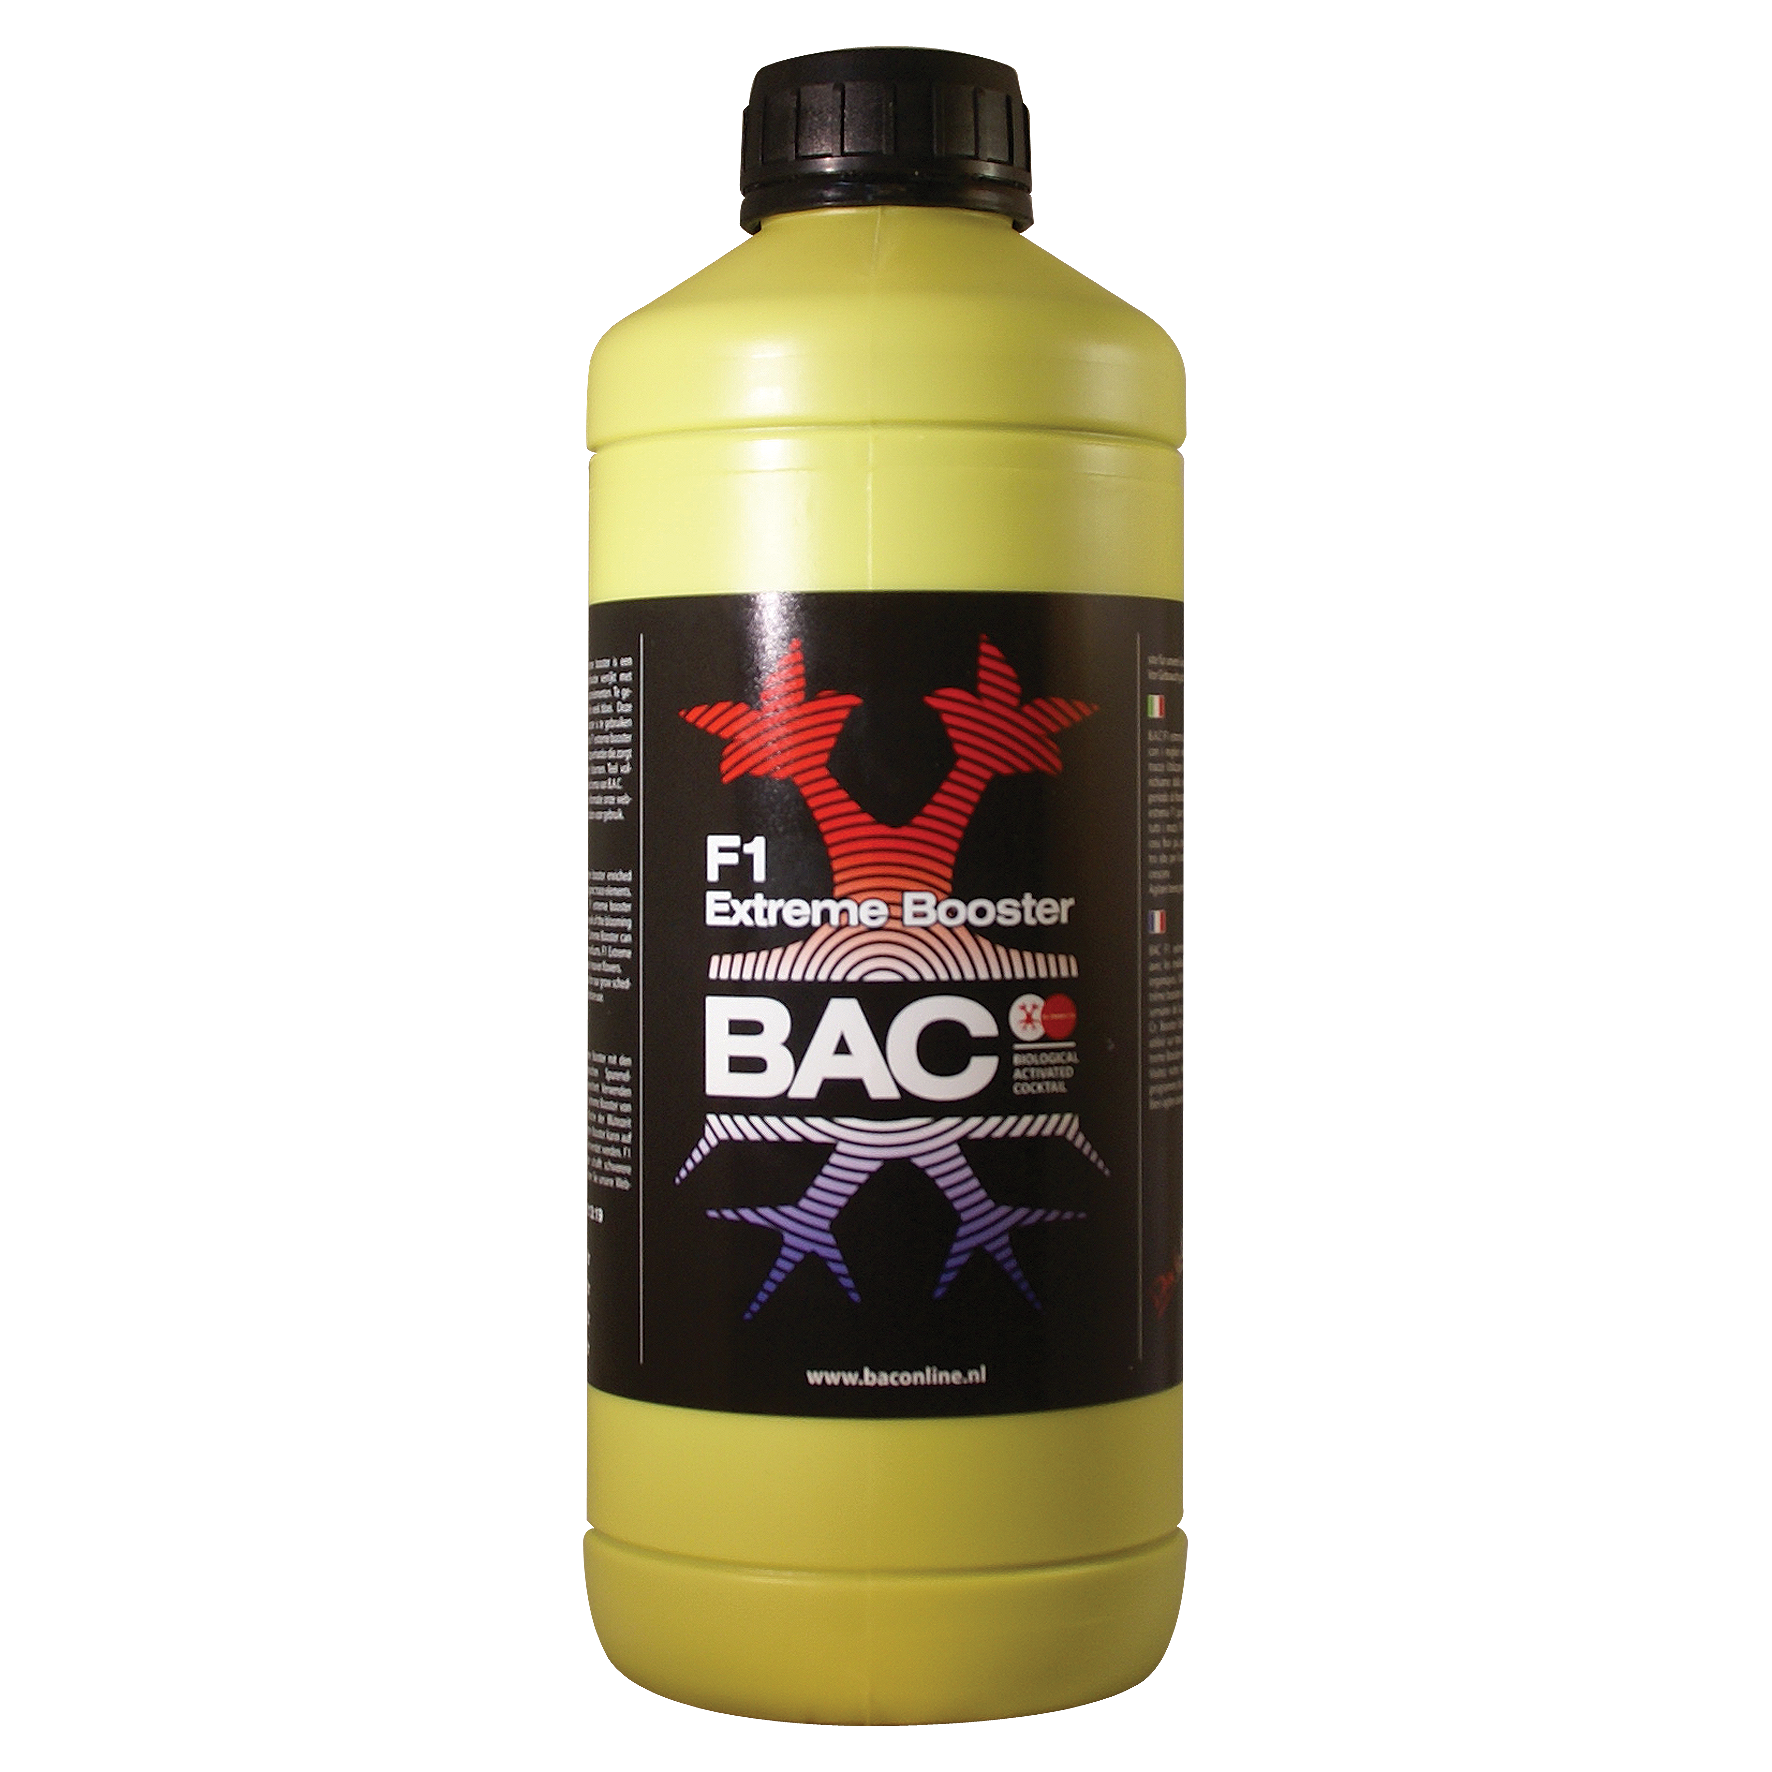 Дейли бак. F1 extreme Booster 1l b.a.c.. B.A.C Organic Bloom 1л. F1 extreme Booster 5л. B.A.C 1 component grow 1л.